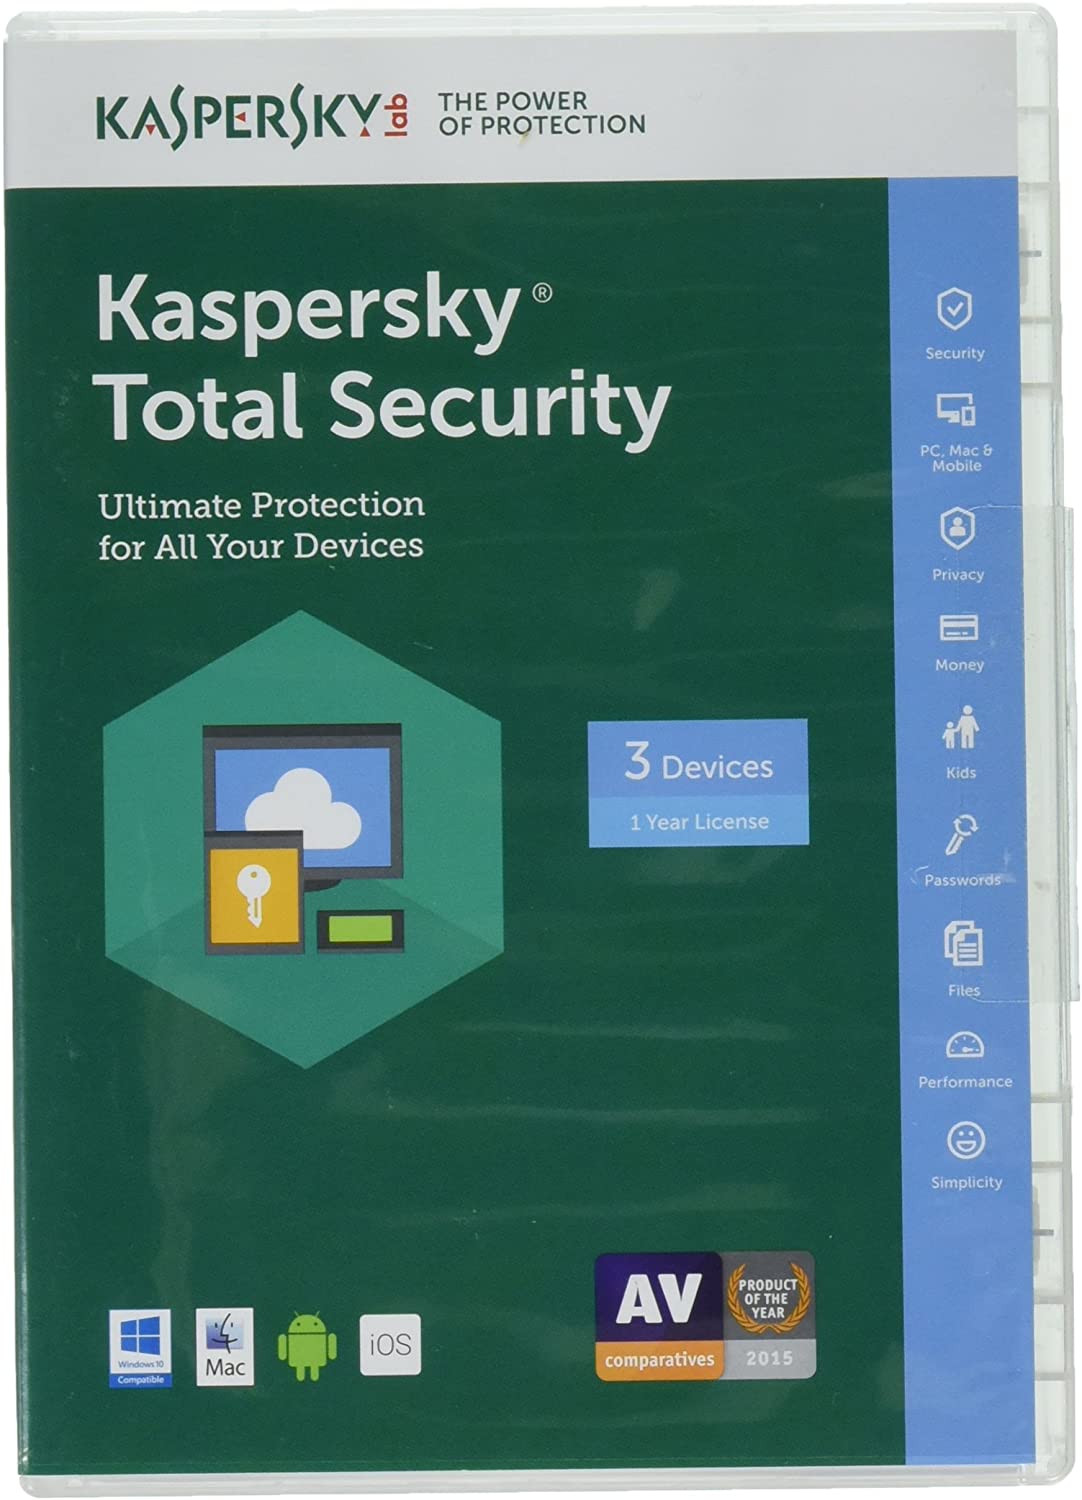 Kaspersky Total Security 2018 Full Version With Crack